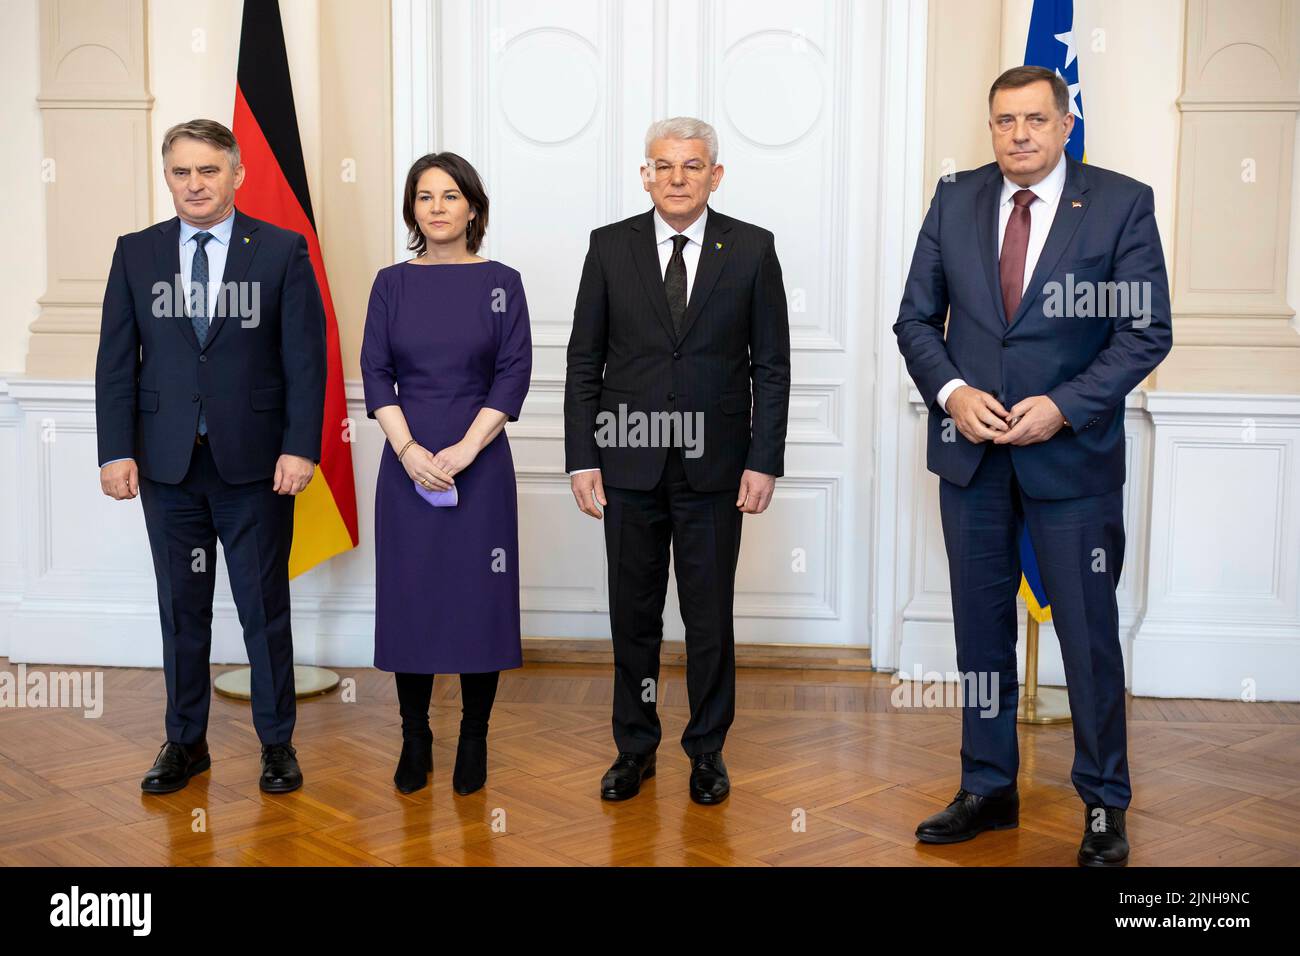 Annalena Baerbock (Alliance 90/The Greens), Federal Foreign Minister, at the welcome by the Presidency of Bosnia and Herzegovina, Mr. Zeljko Komsic, (2nd from left) Sefik Dzaferovic (2nd from right) and Milorad Dodik (R). On her trip, BM Baerbock visits Bosnia and Herzegovina, Kosovo, Serbia and the Republic of Moldova. Sarajevo, 03/10/2022 Stock Photo